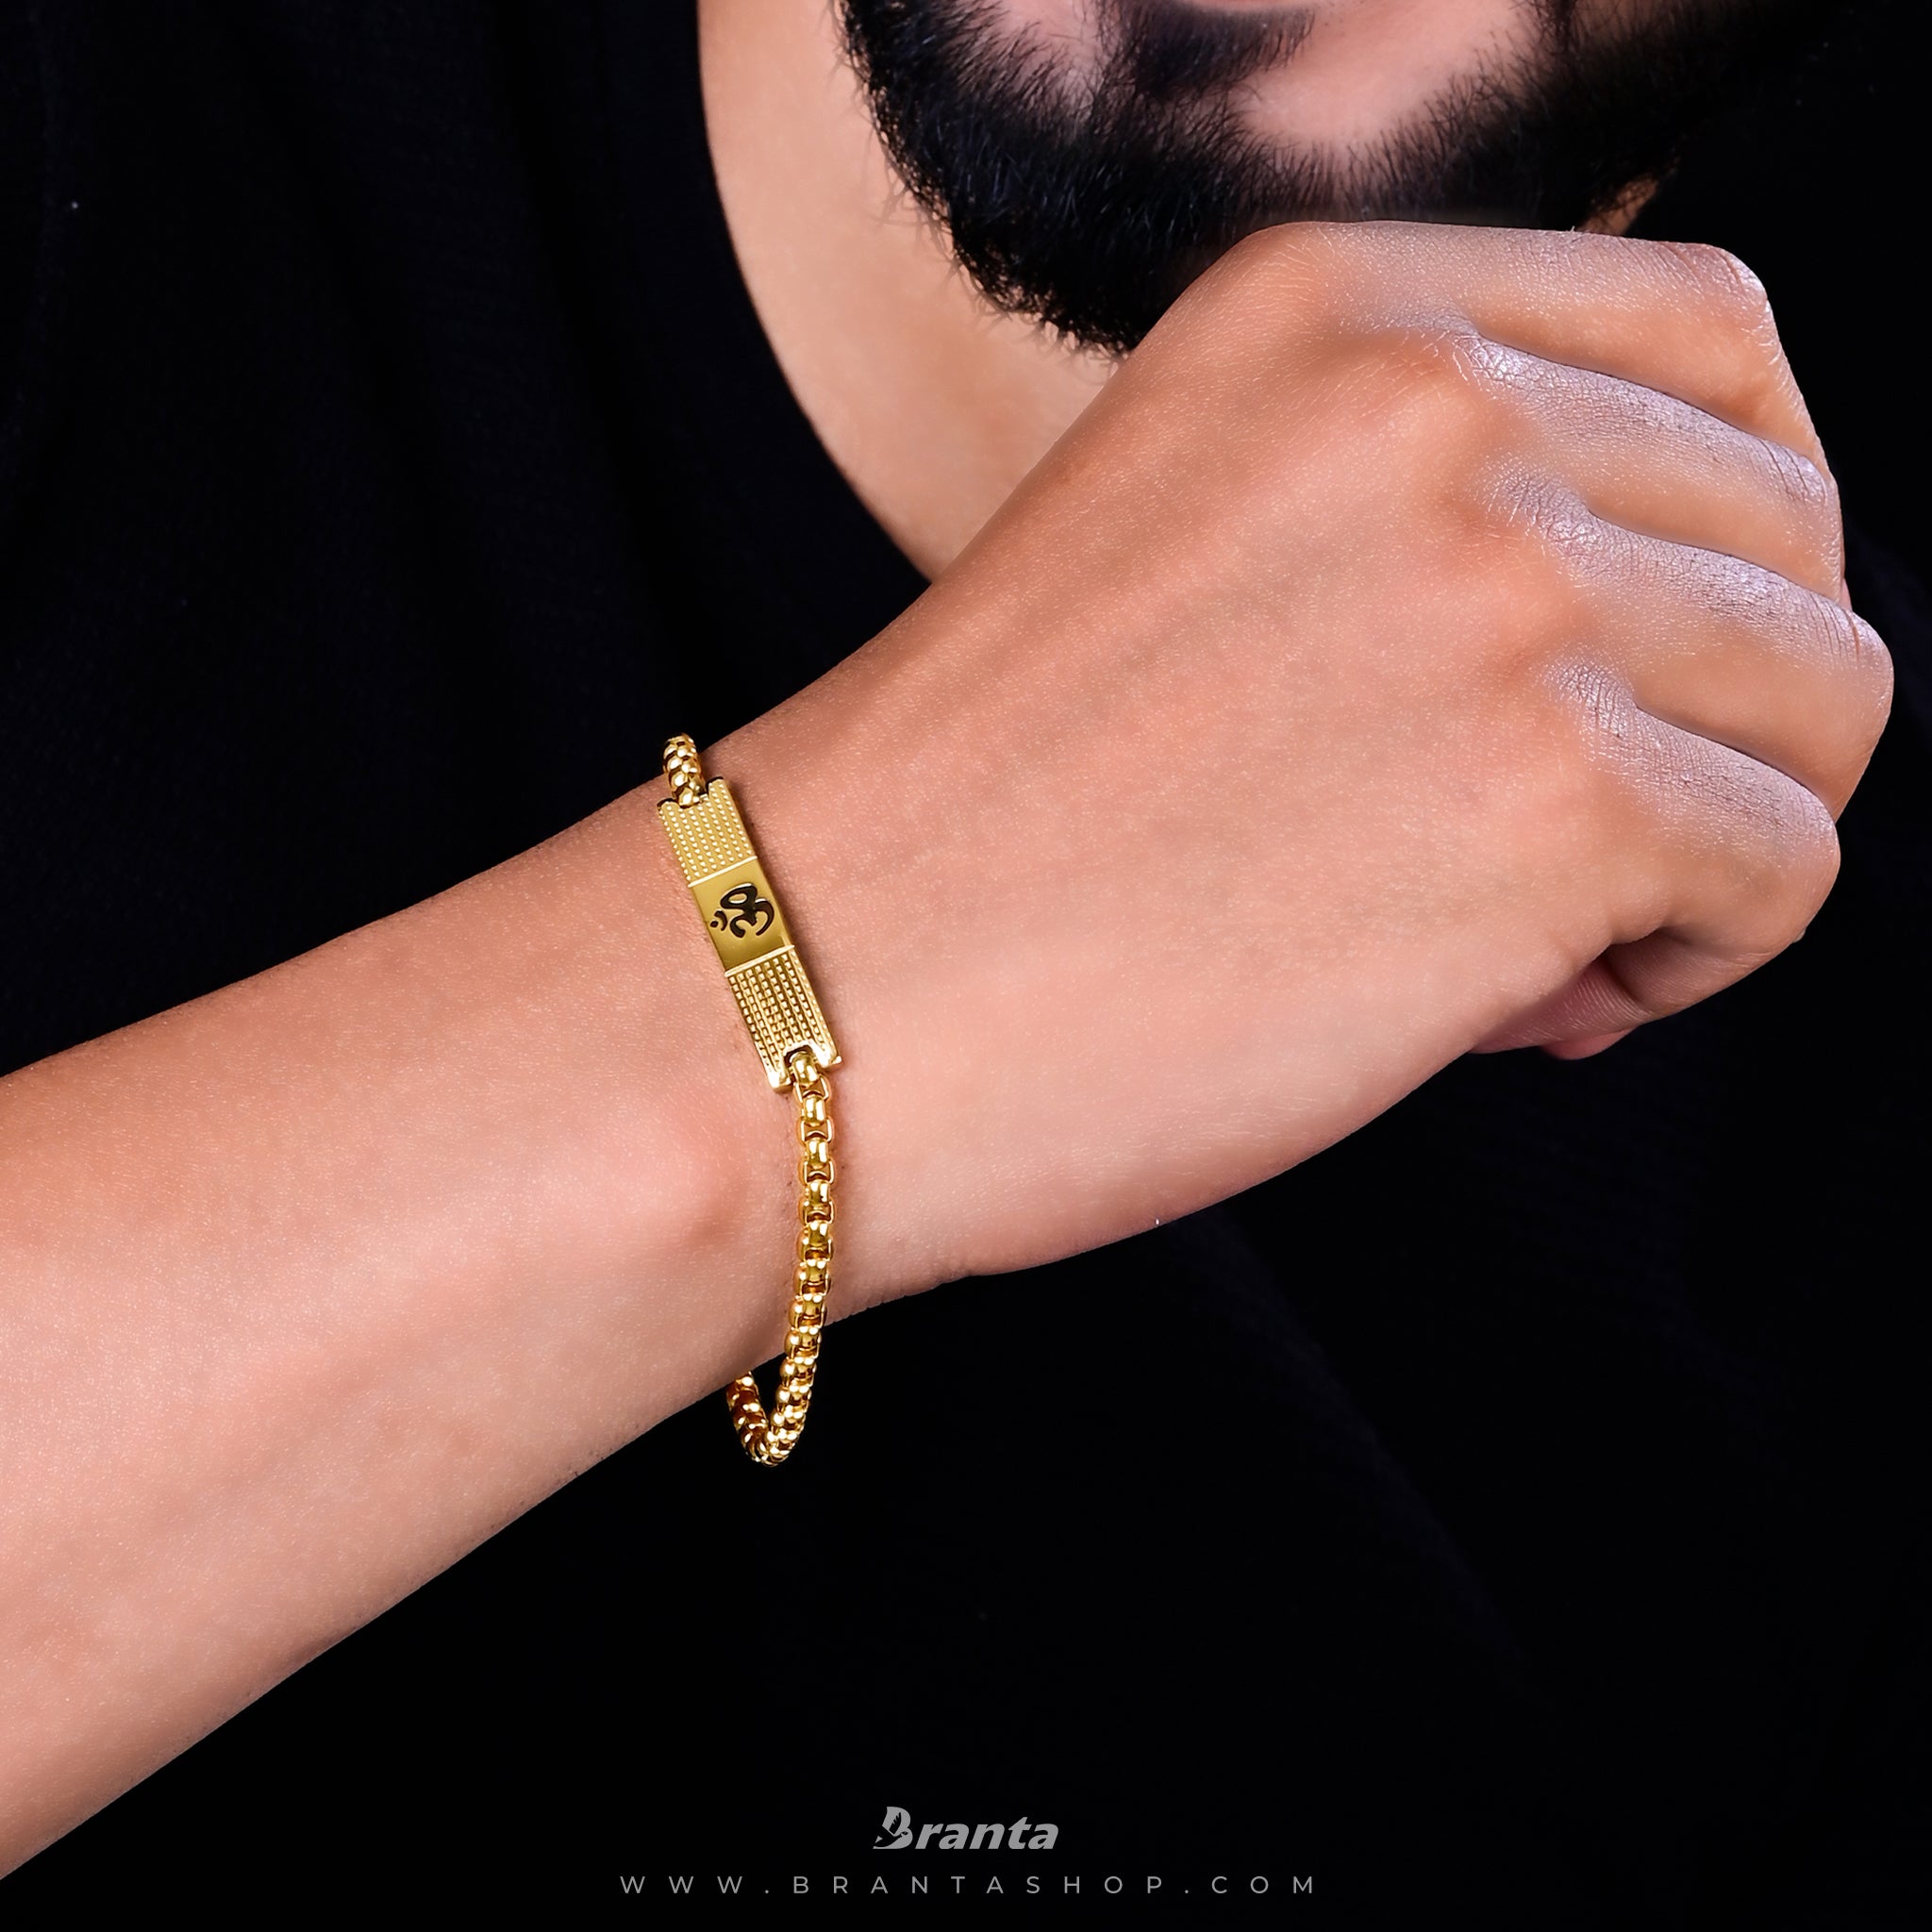 Joyalukkas - Introducing the exquisite 22k Gold Men's bracelet, finely  crafted in Turkey. With polished yellow gold finished with a high gloss,  this bracelet is perfectly balanced with a highly durable matte-finish